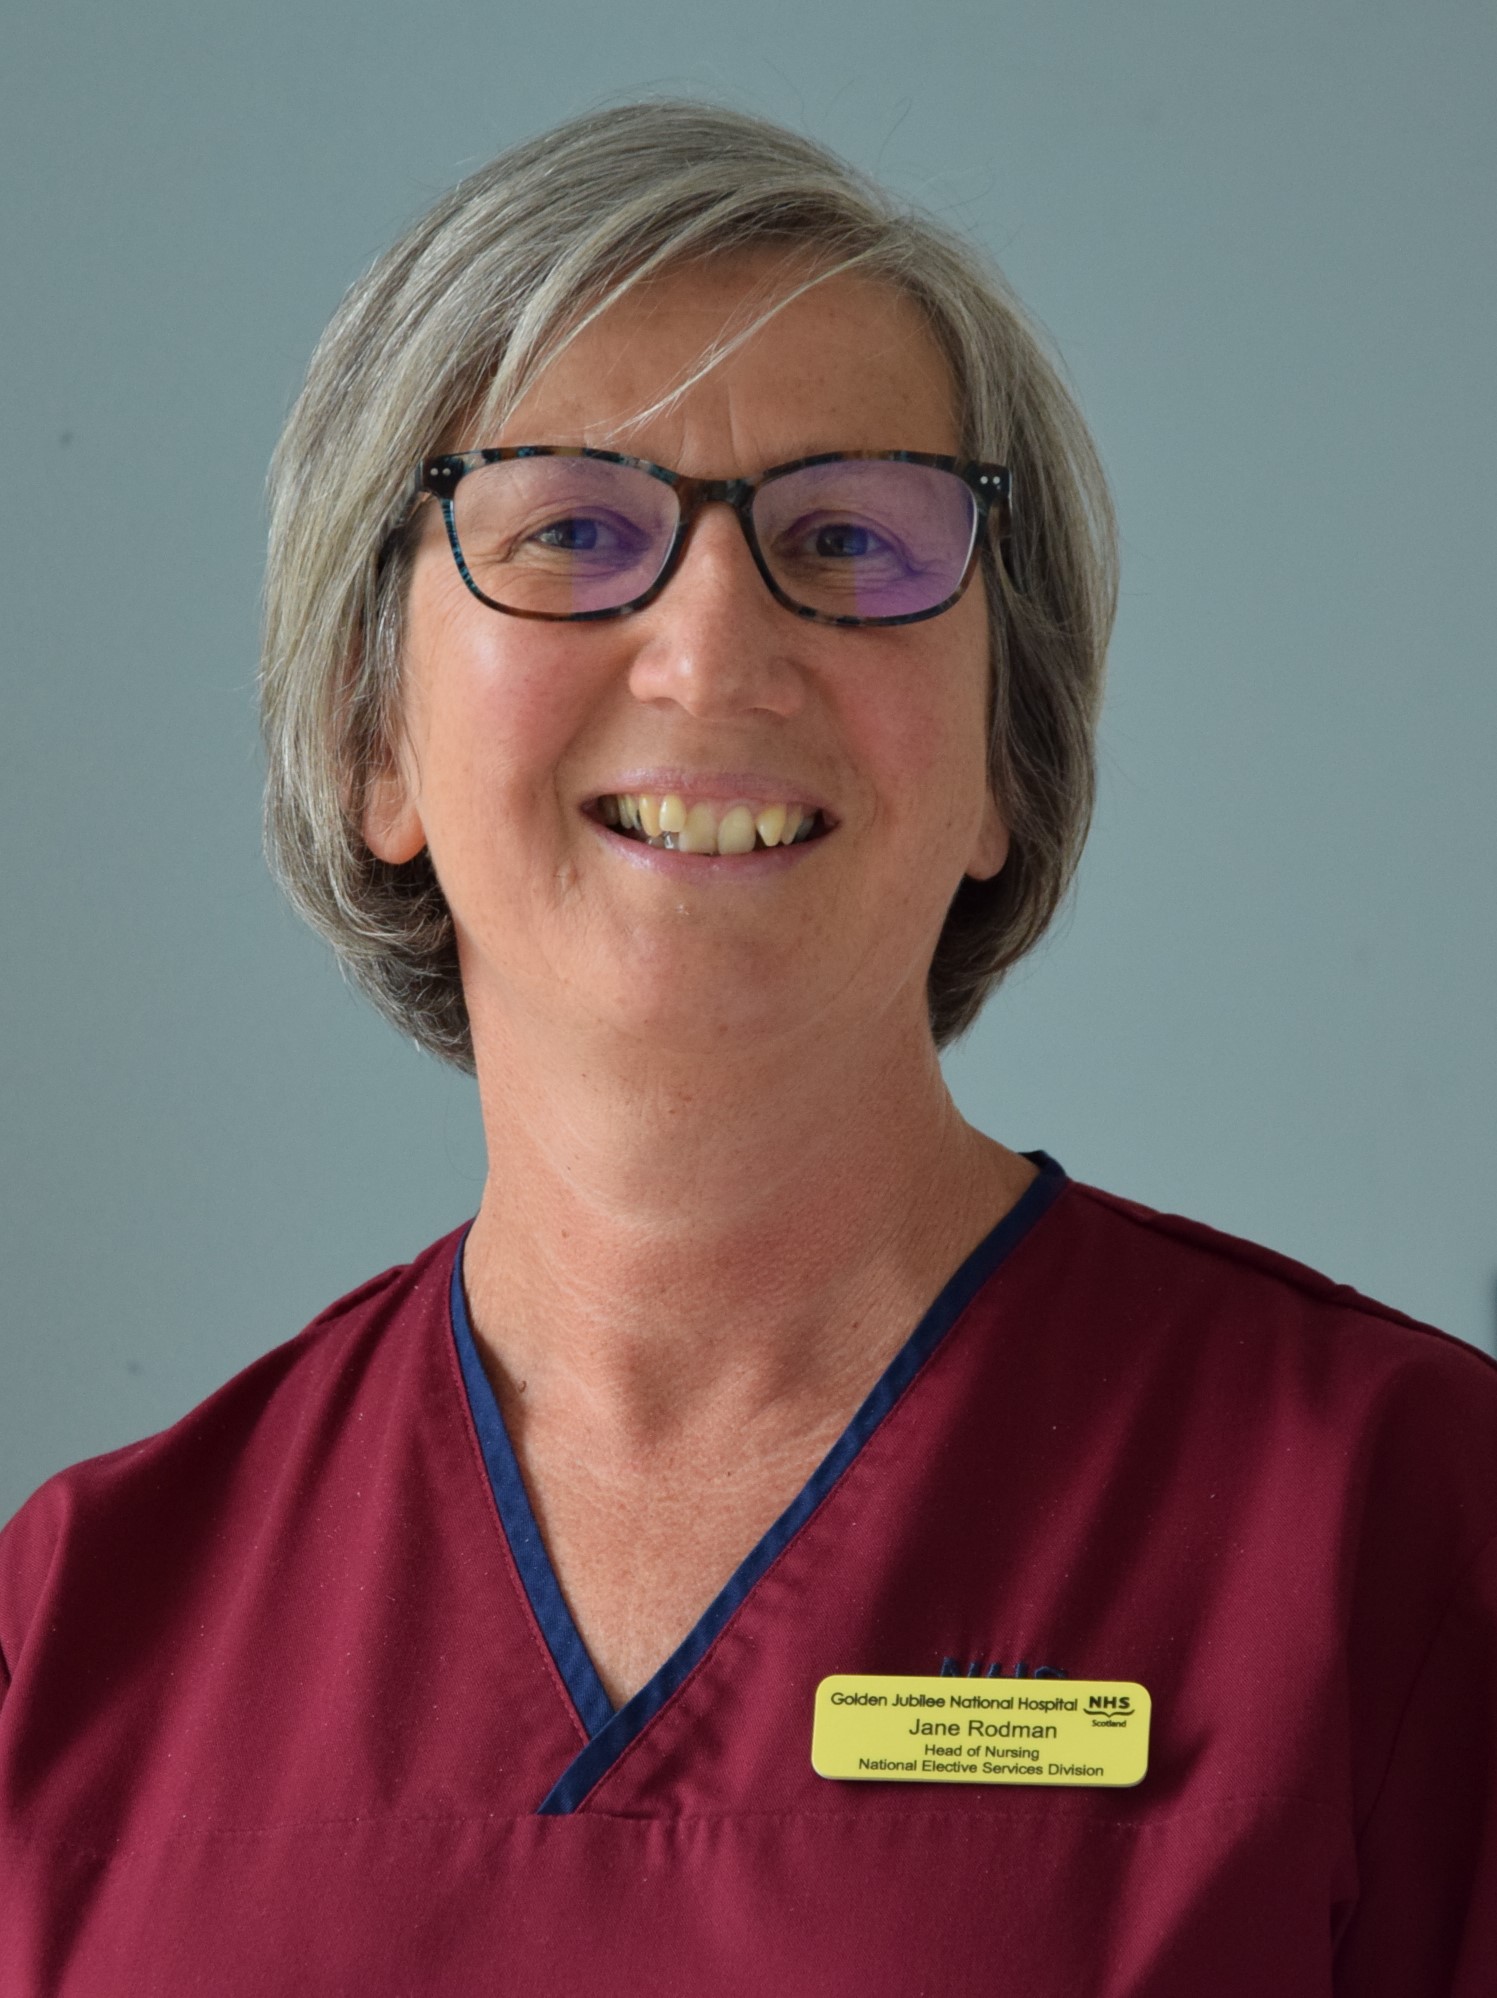 A person with short grey hair, wearing maroon NHS scrubs.